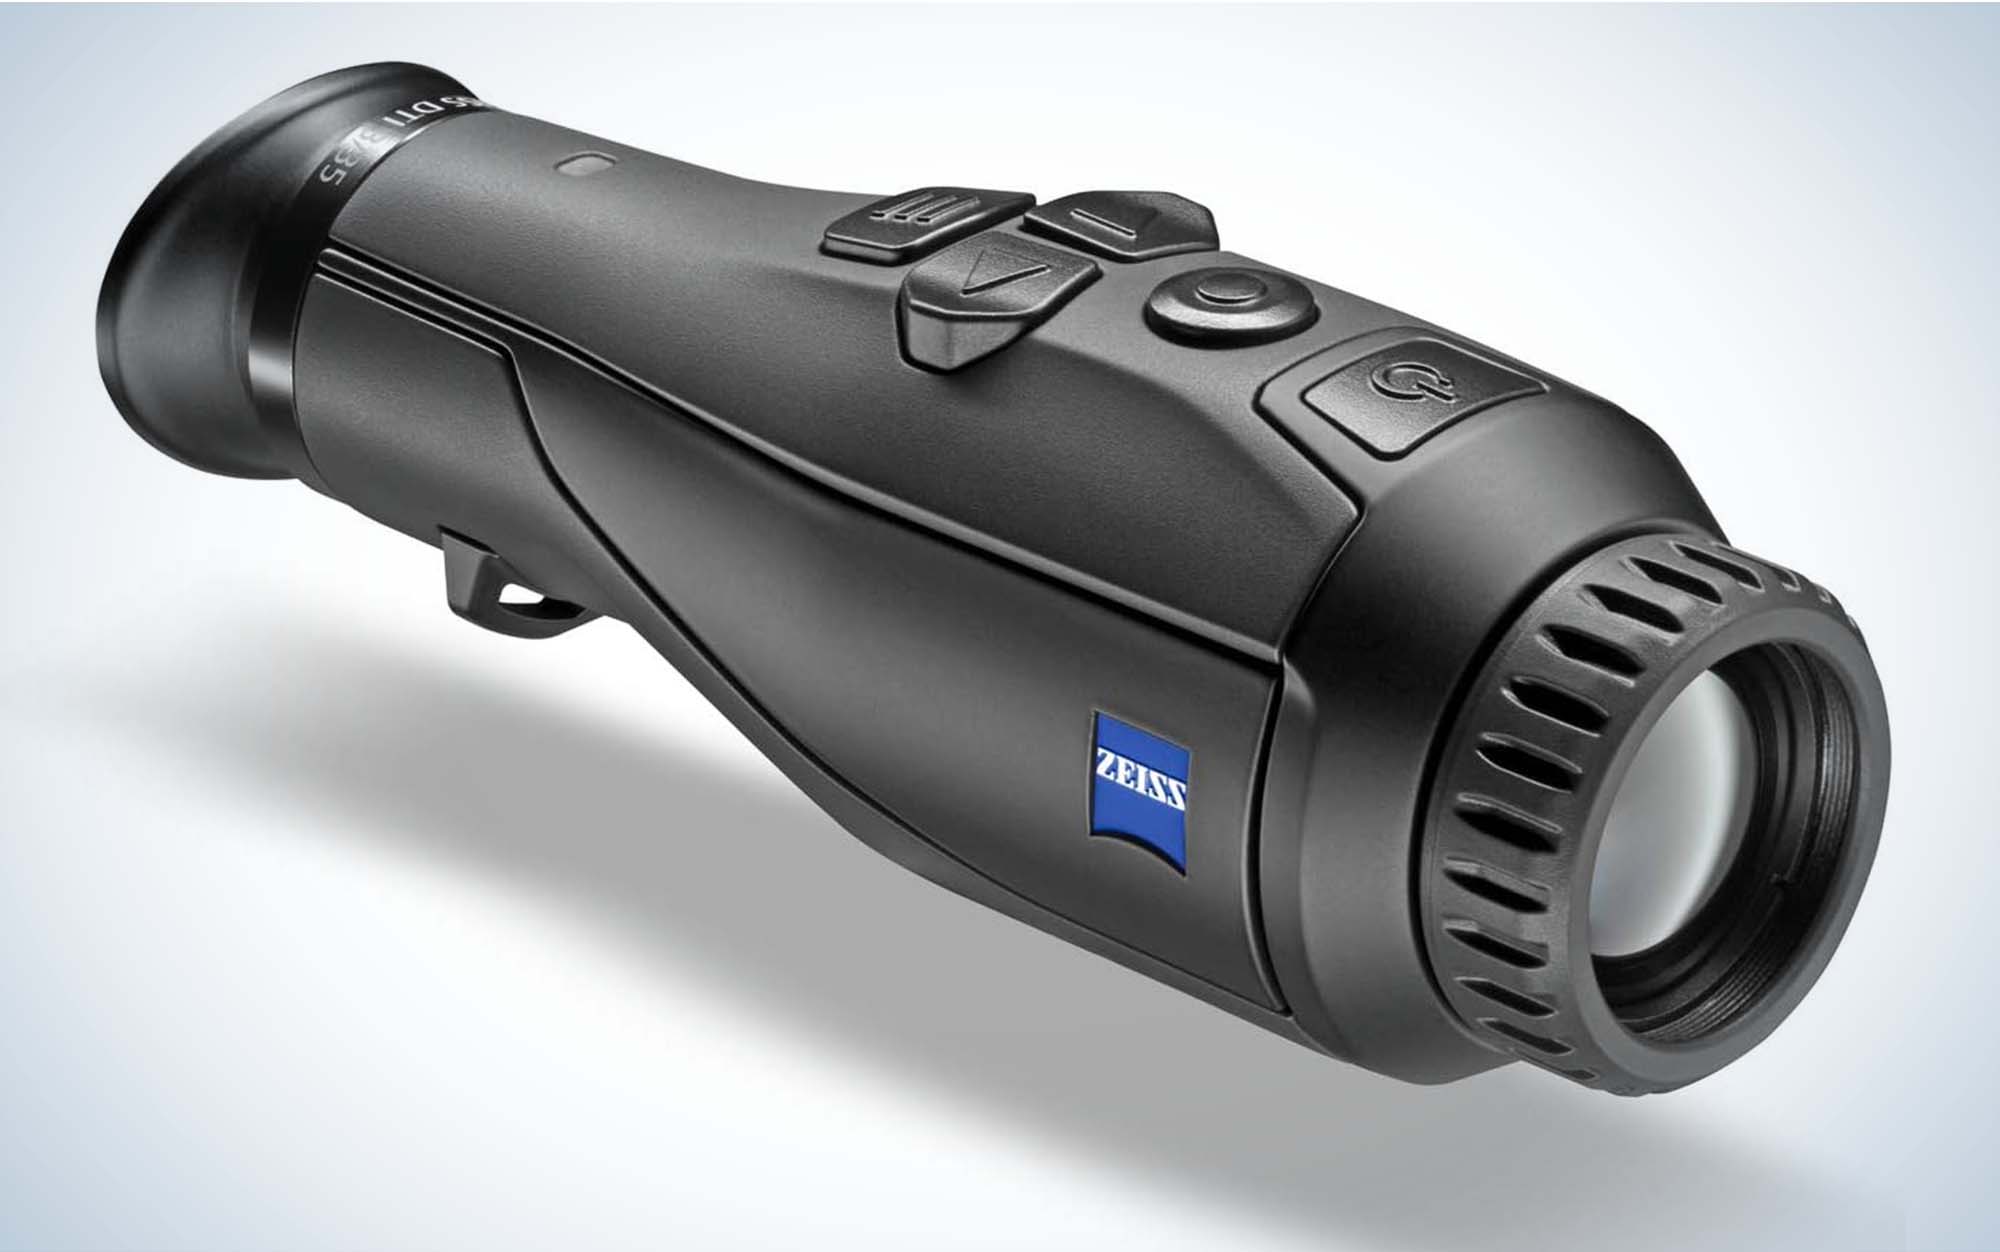 The Zeiss thermal monocular